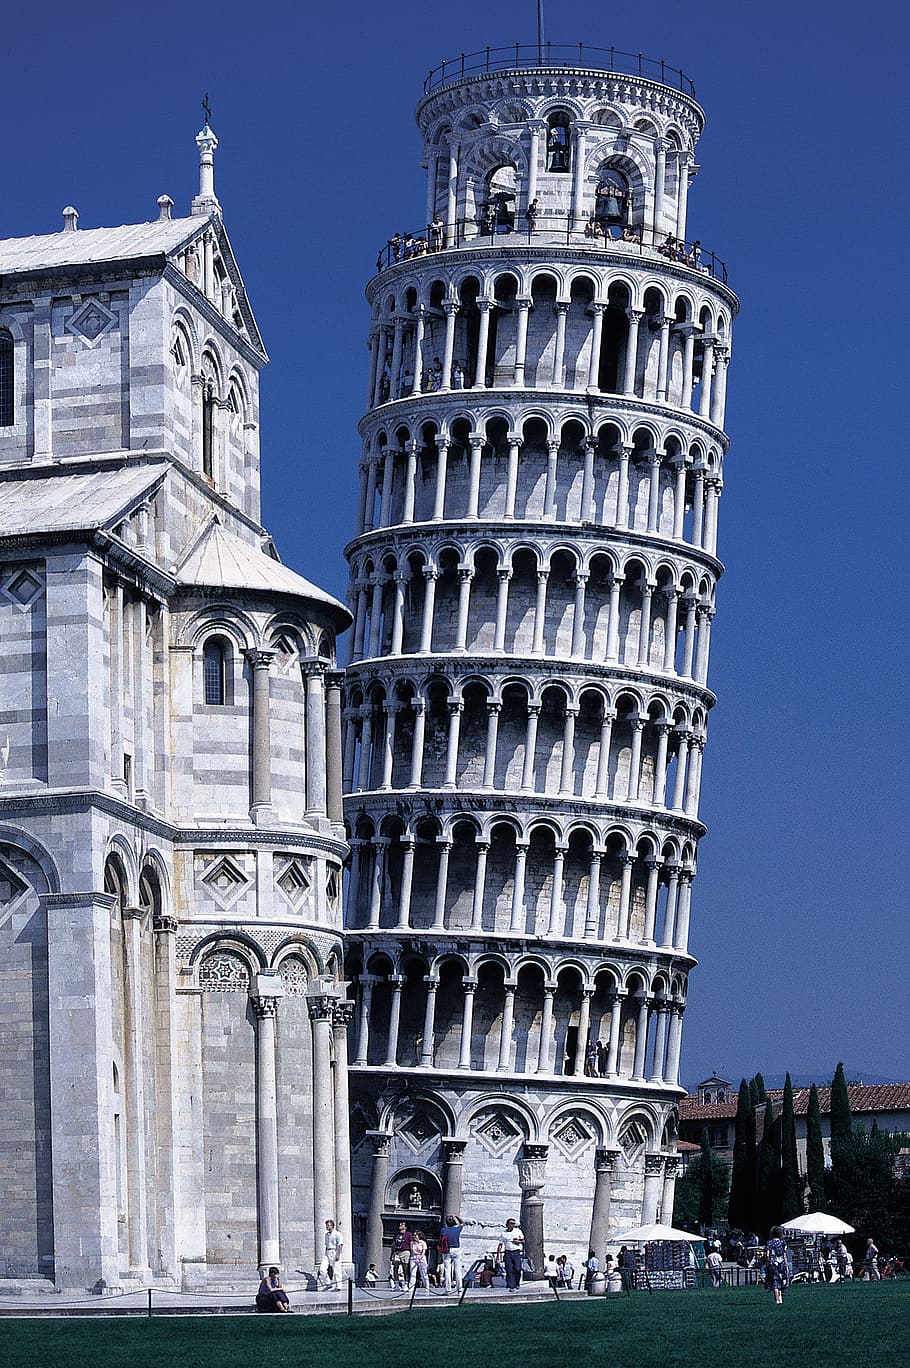 Leaning Tower of Pisa, Italy, Dom, architecture, building, church